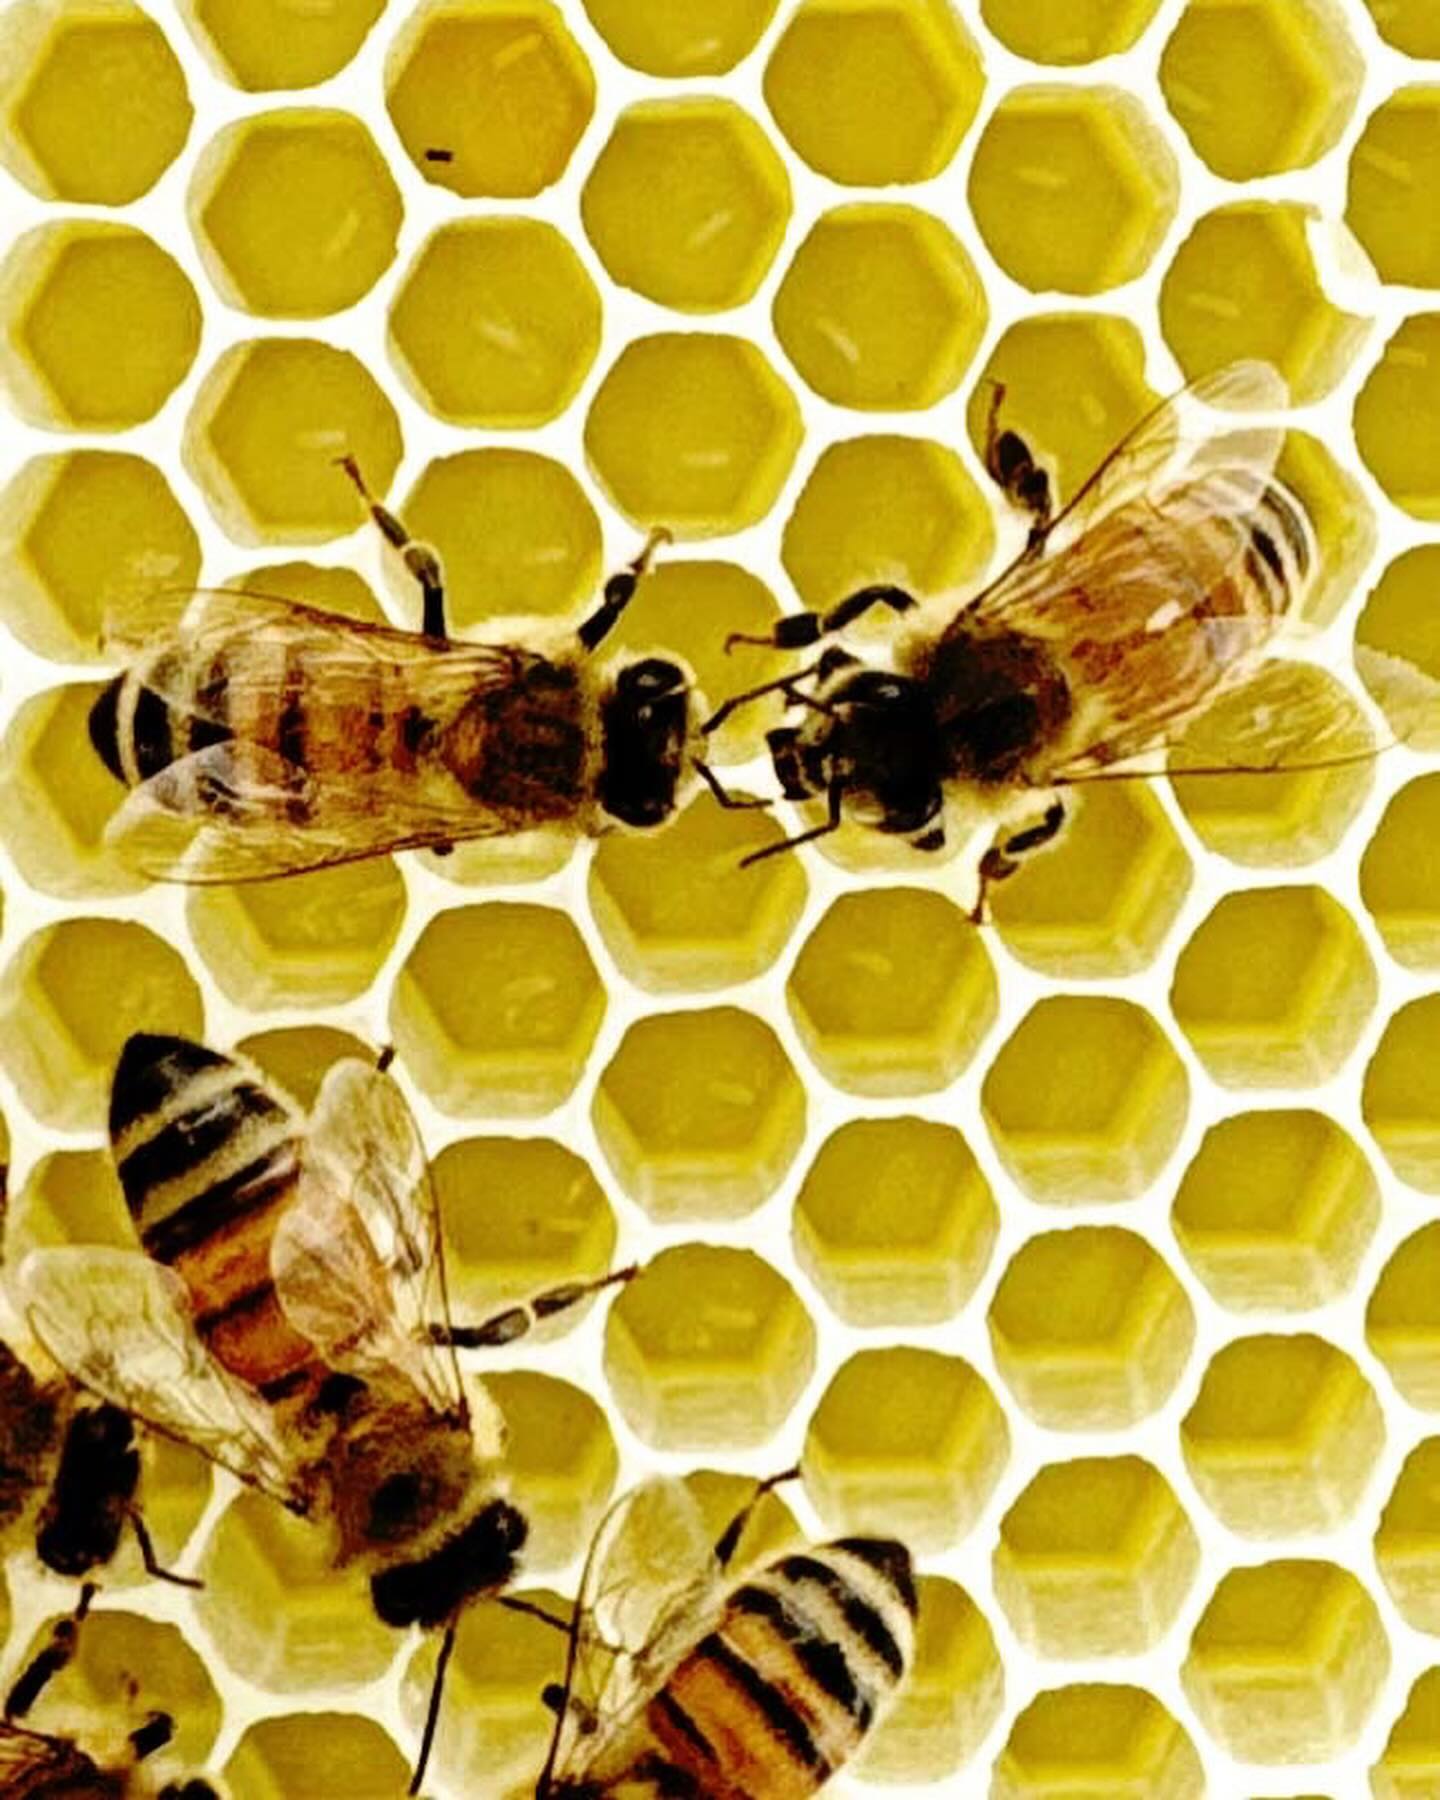 Bee babies! The tiny grains of rice in each cell of the honey comb are fertilized eggs laid by the queen. The queen lays